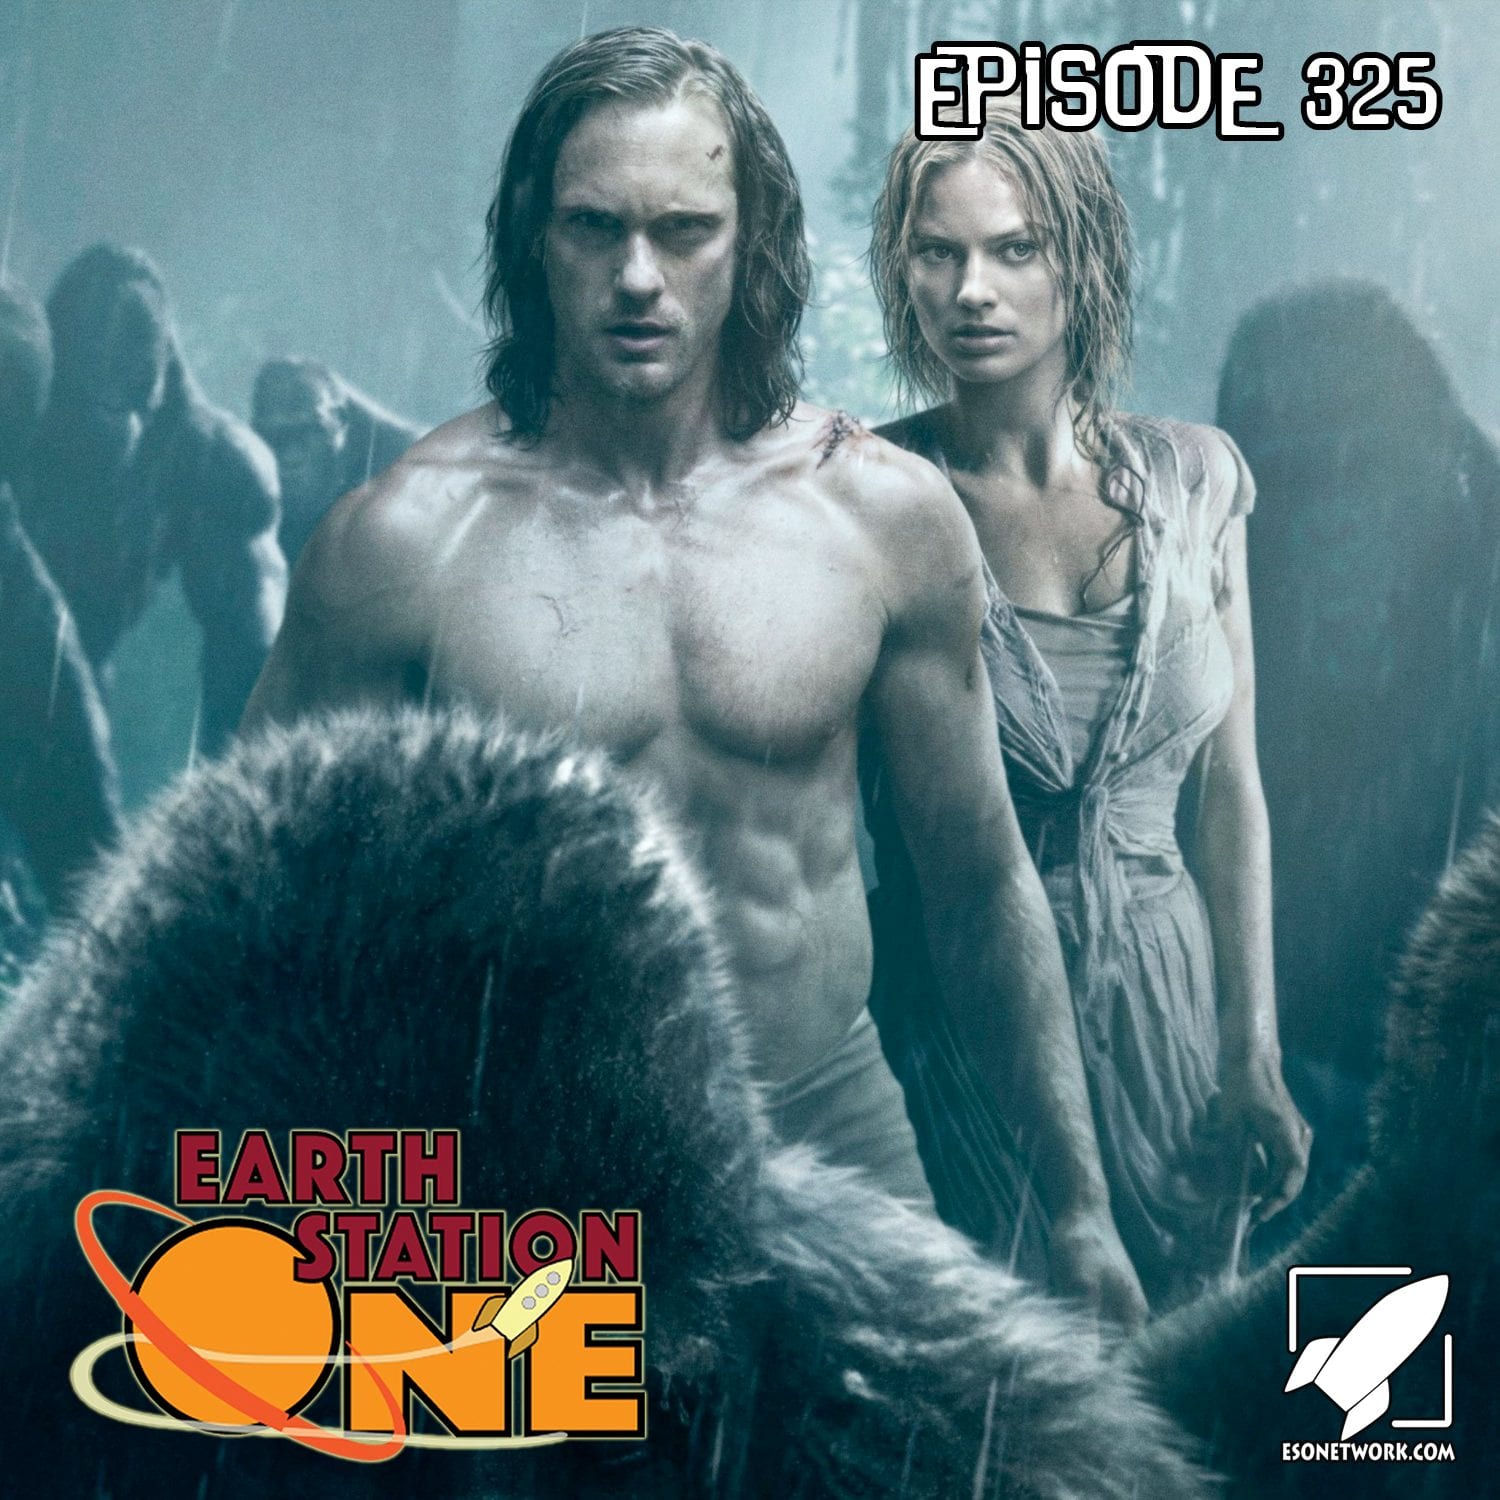 Earth Station One Ep 325